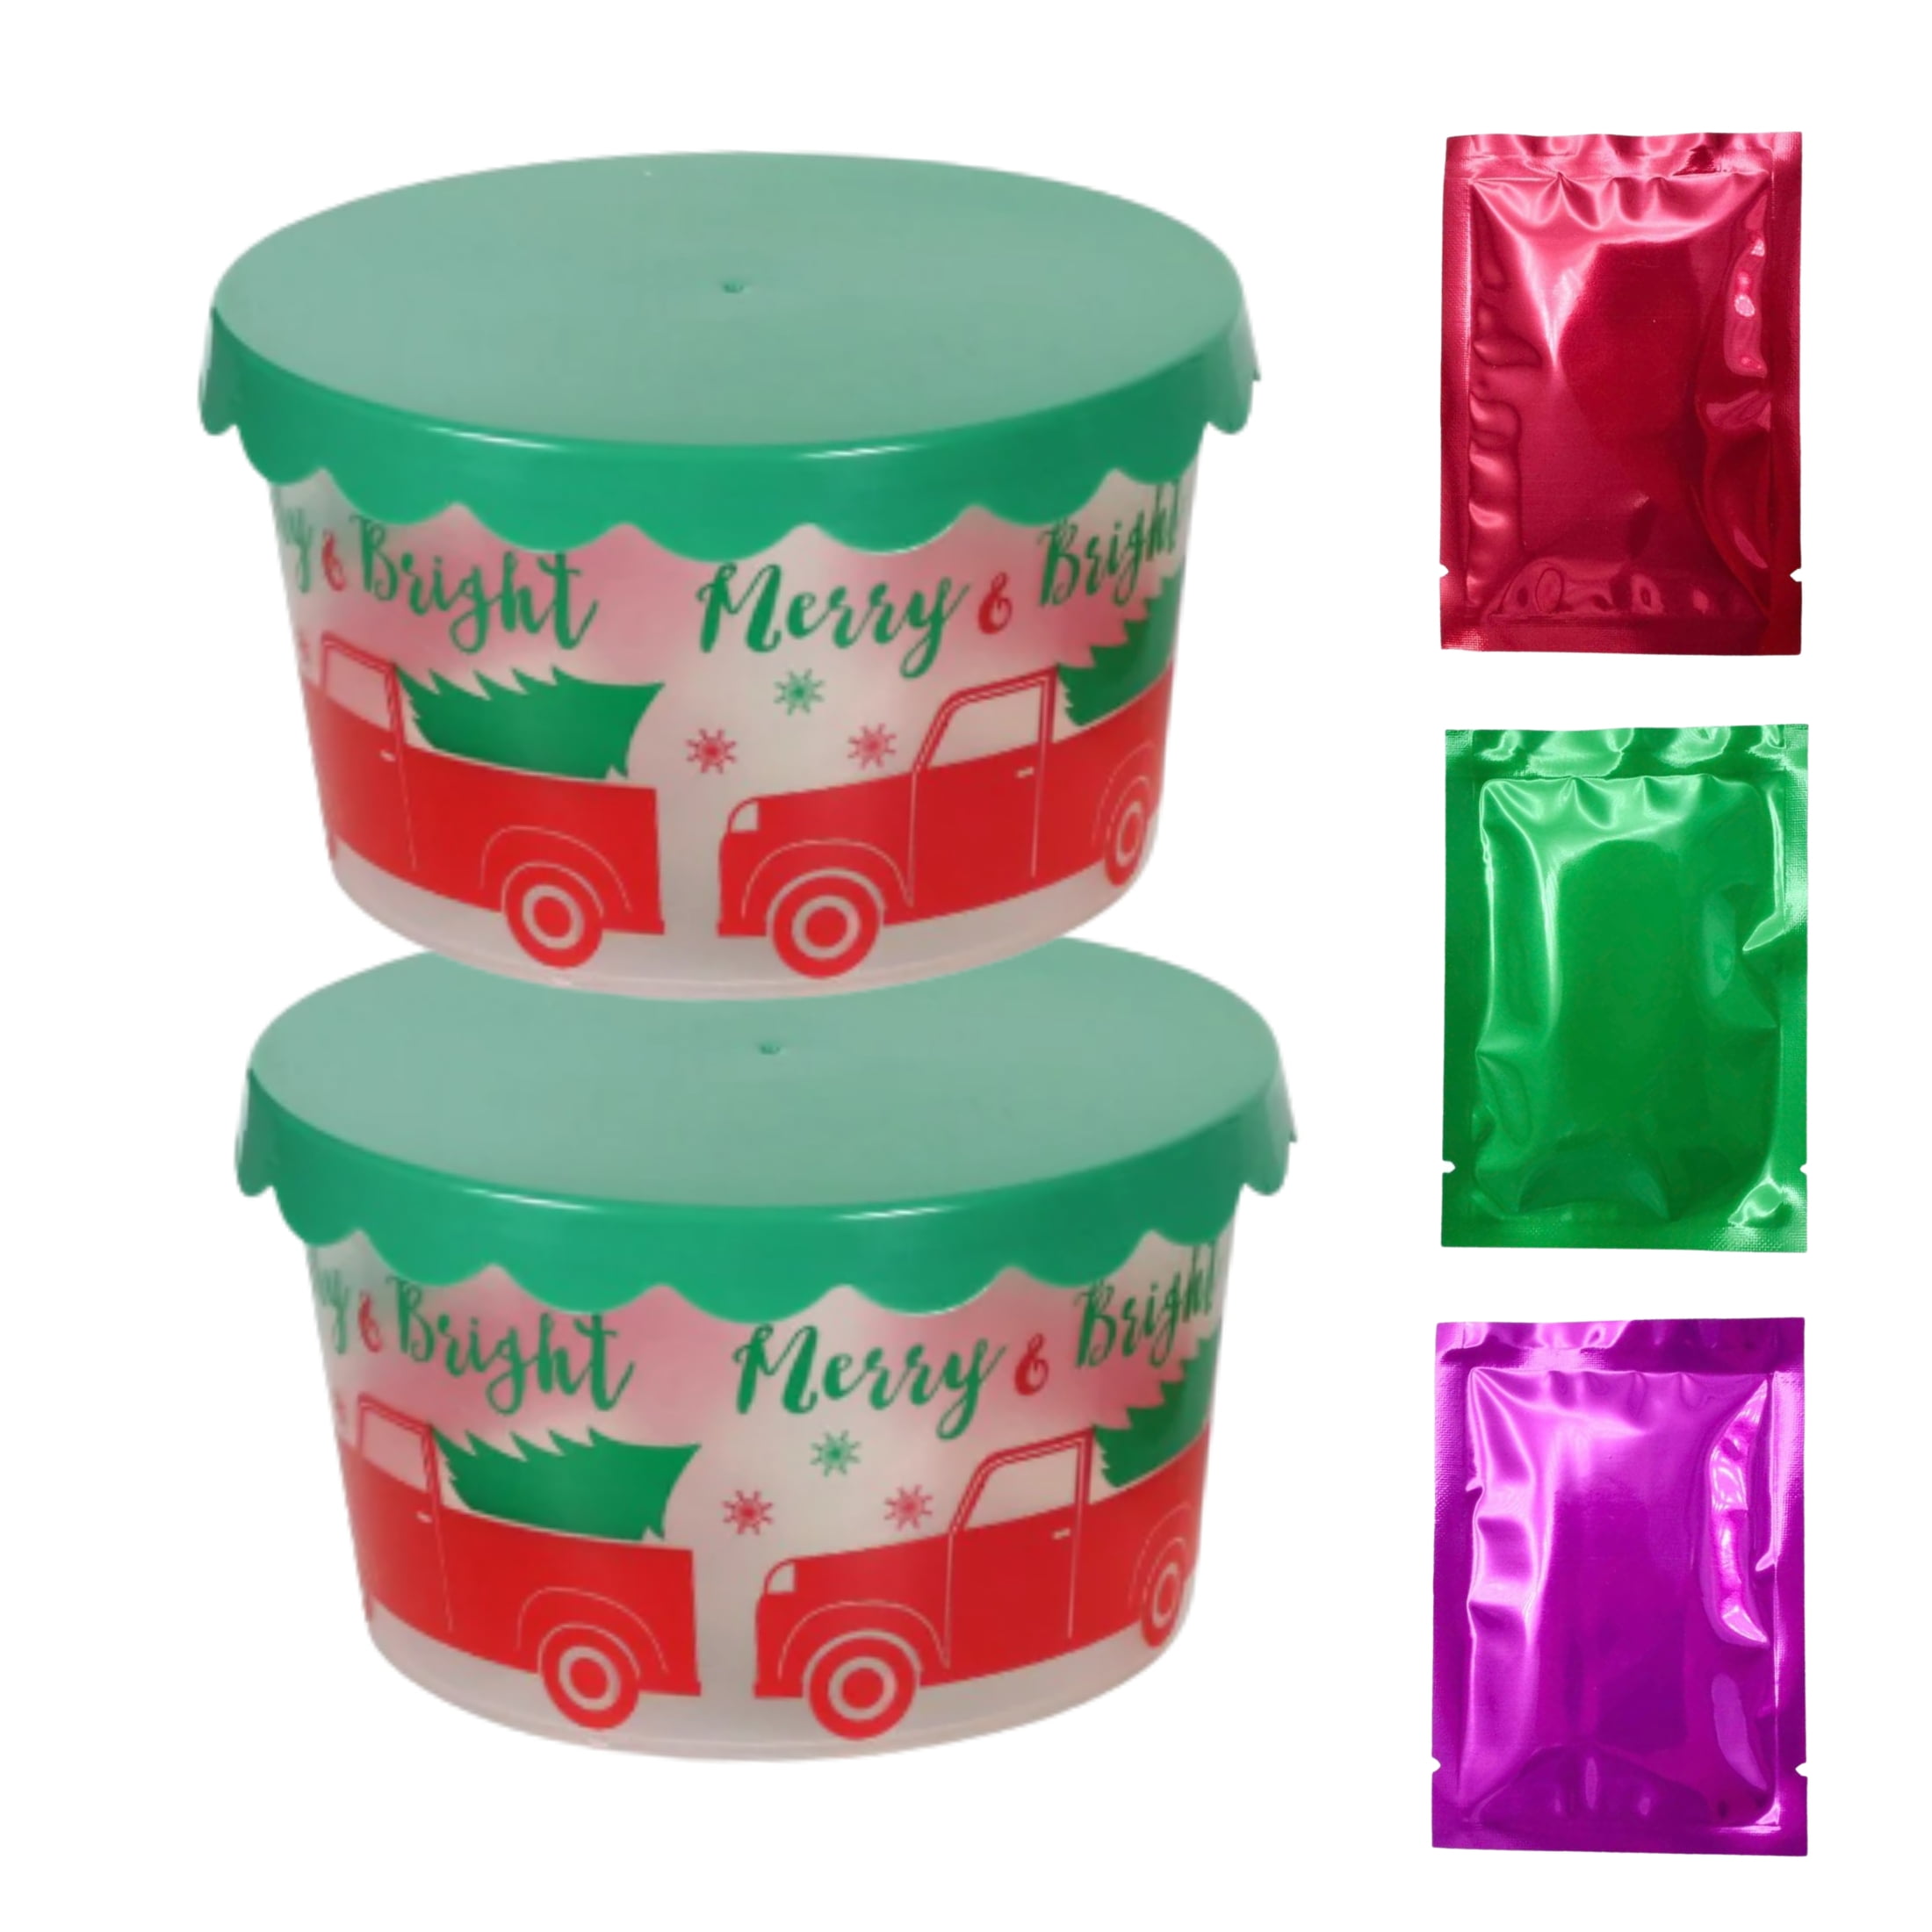 Round Christmas Containers Plastic Food Storage with Lids (2.75x4) Merry  and Bright Printed Tubs Cookies Candies Gift Canister Party Favor Home  Table